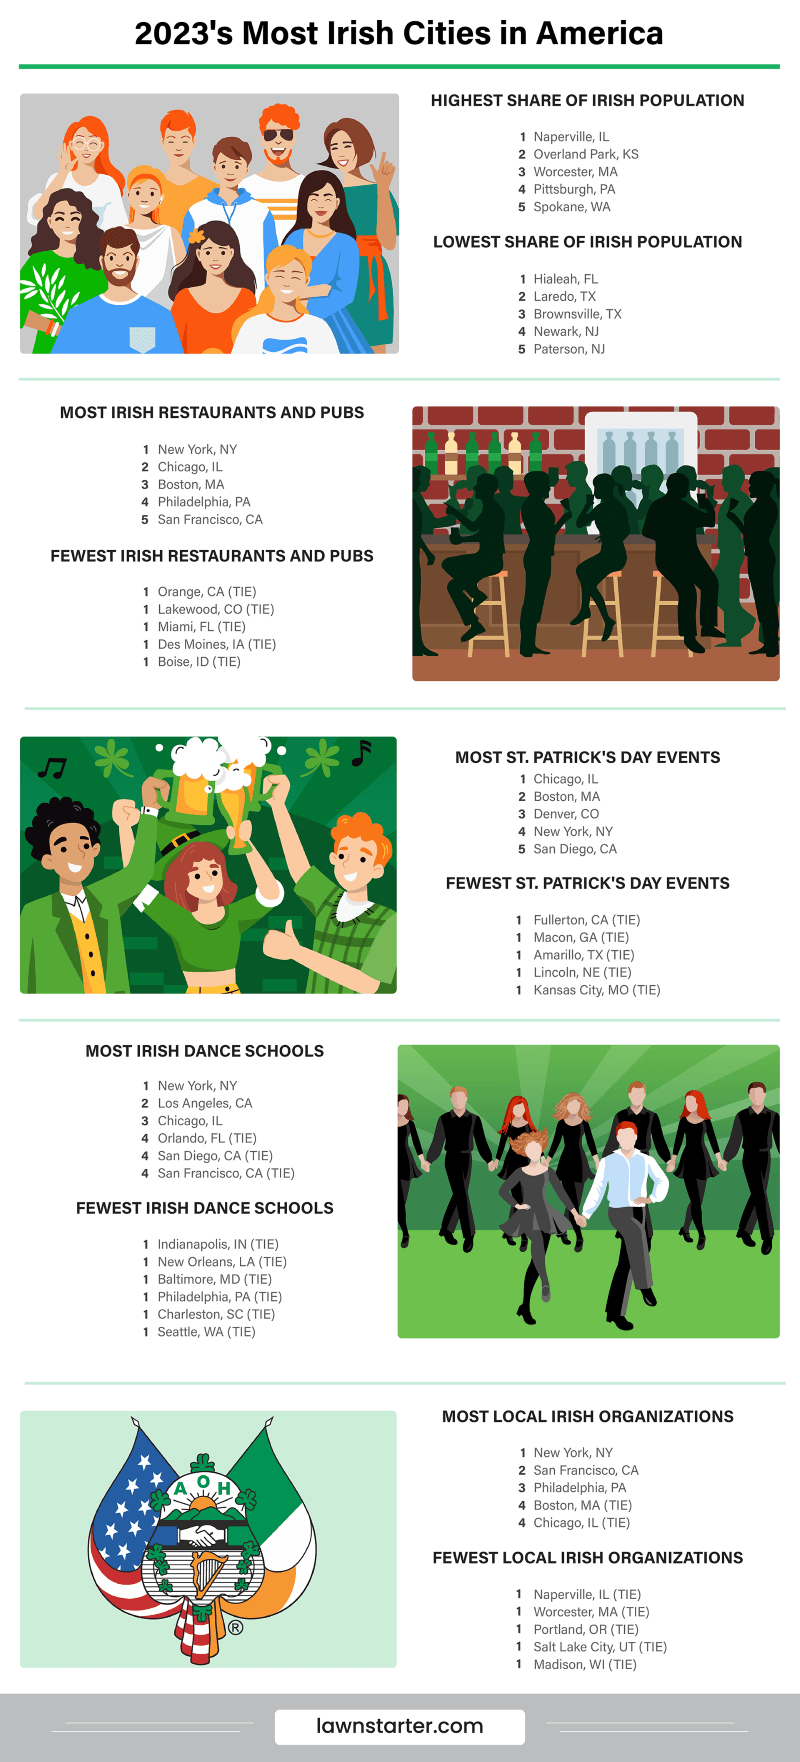 Infographic showing the Most Irish Cities in America, a ranking based on Irish population and access to Irish pubs, dance schools, social groups, and more